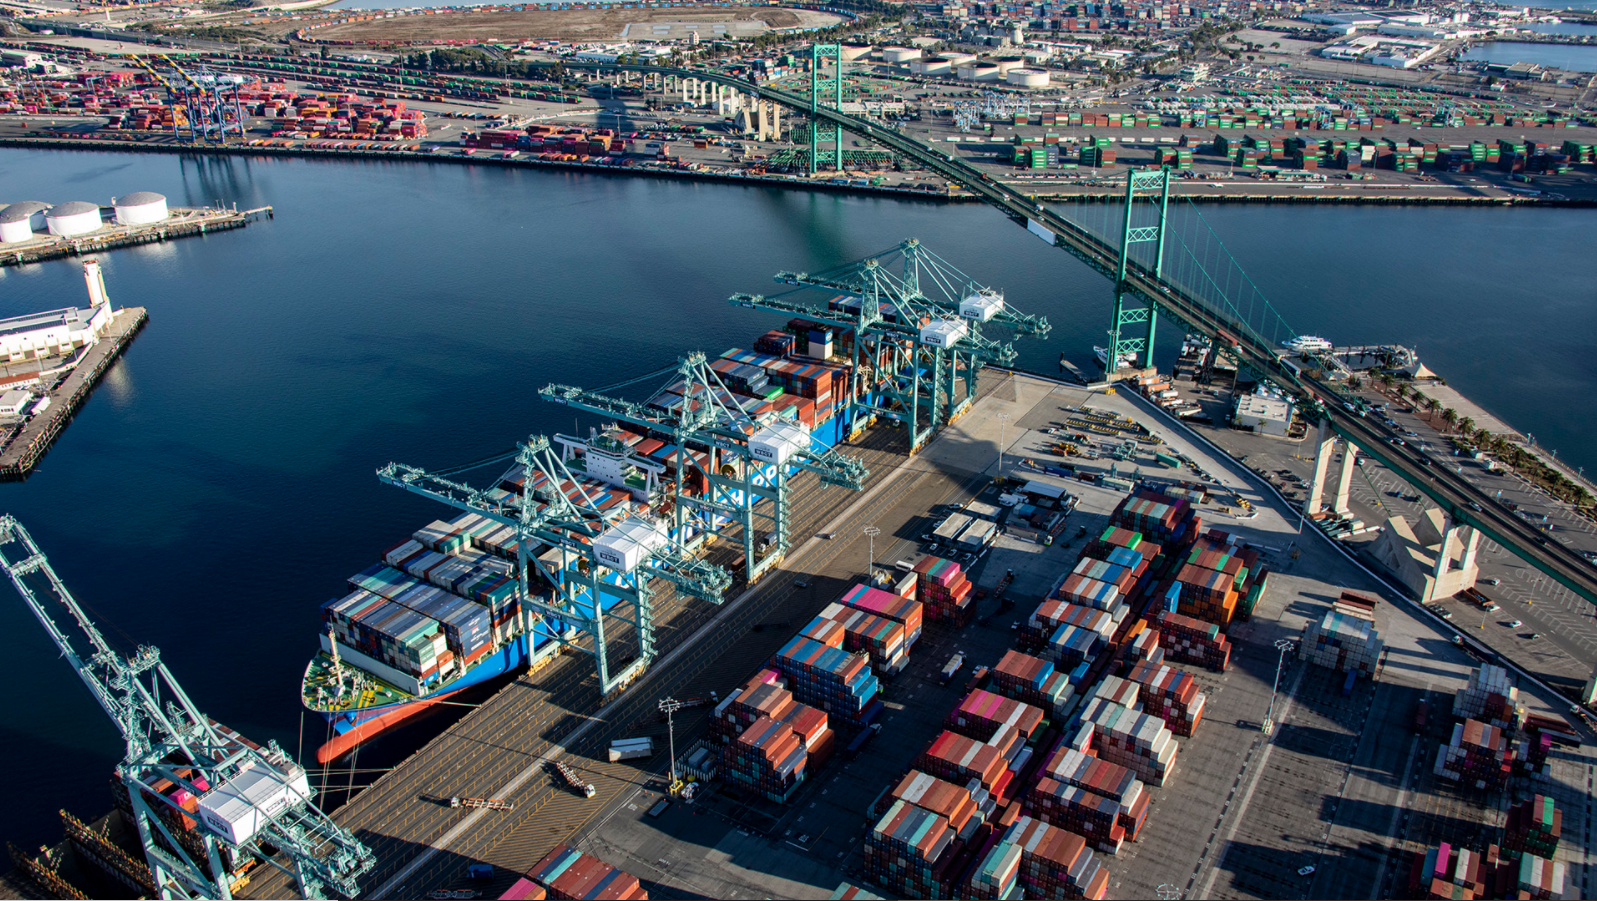 Port of Los Angeles achieves new annual box volume record - Container News